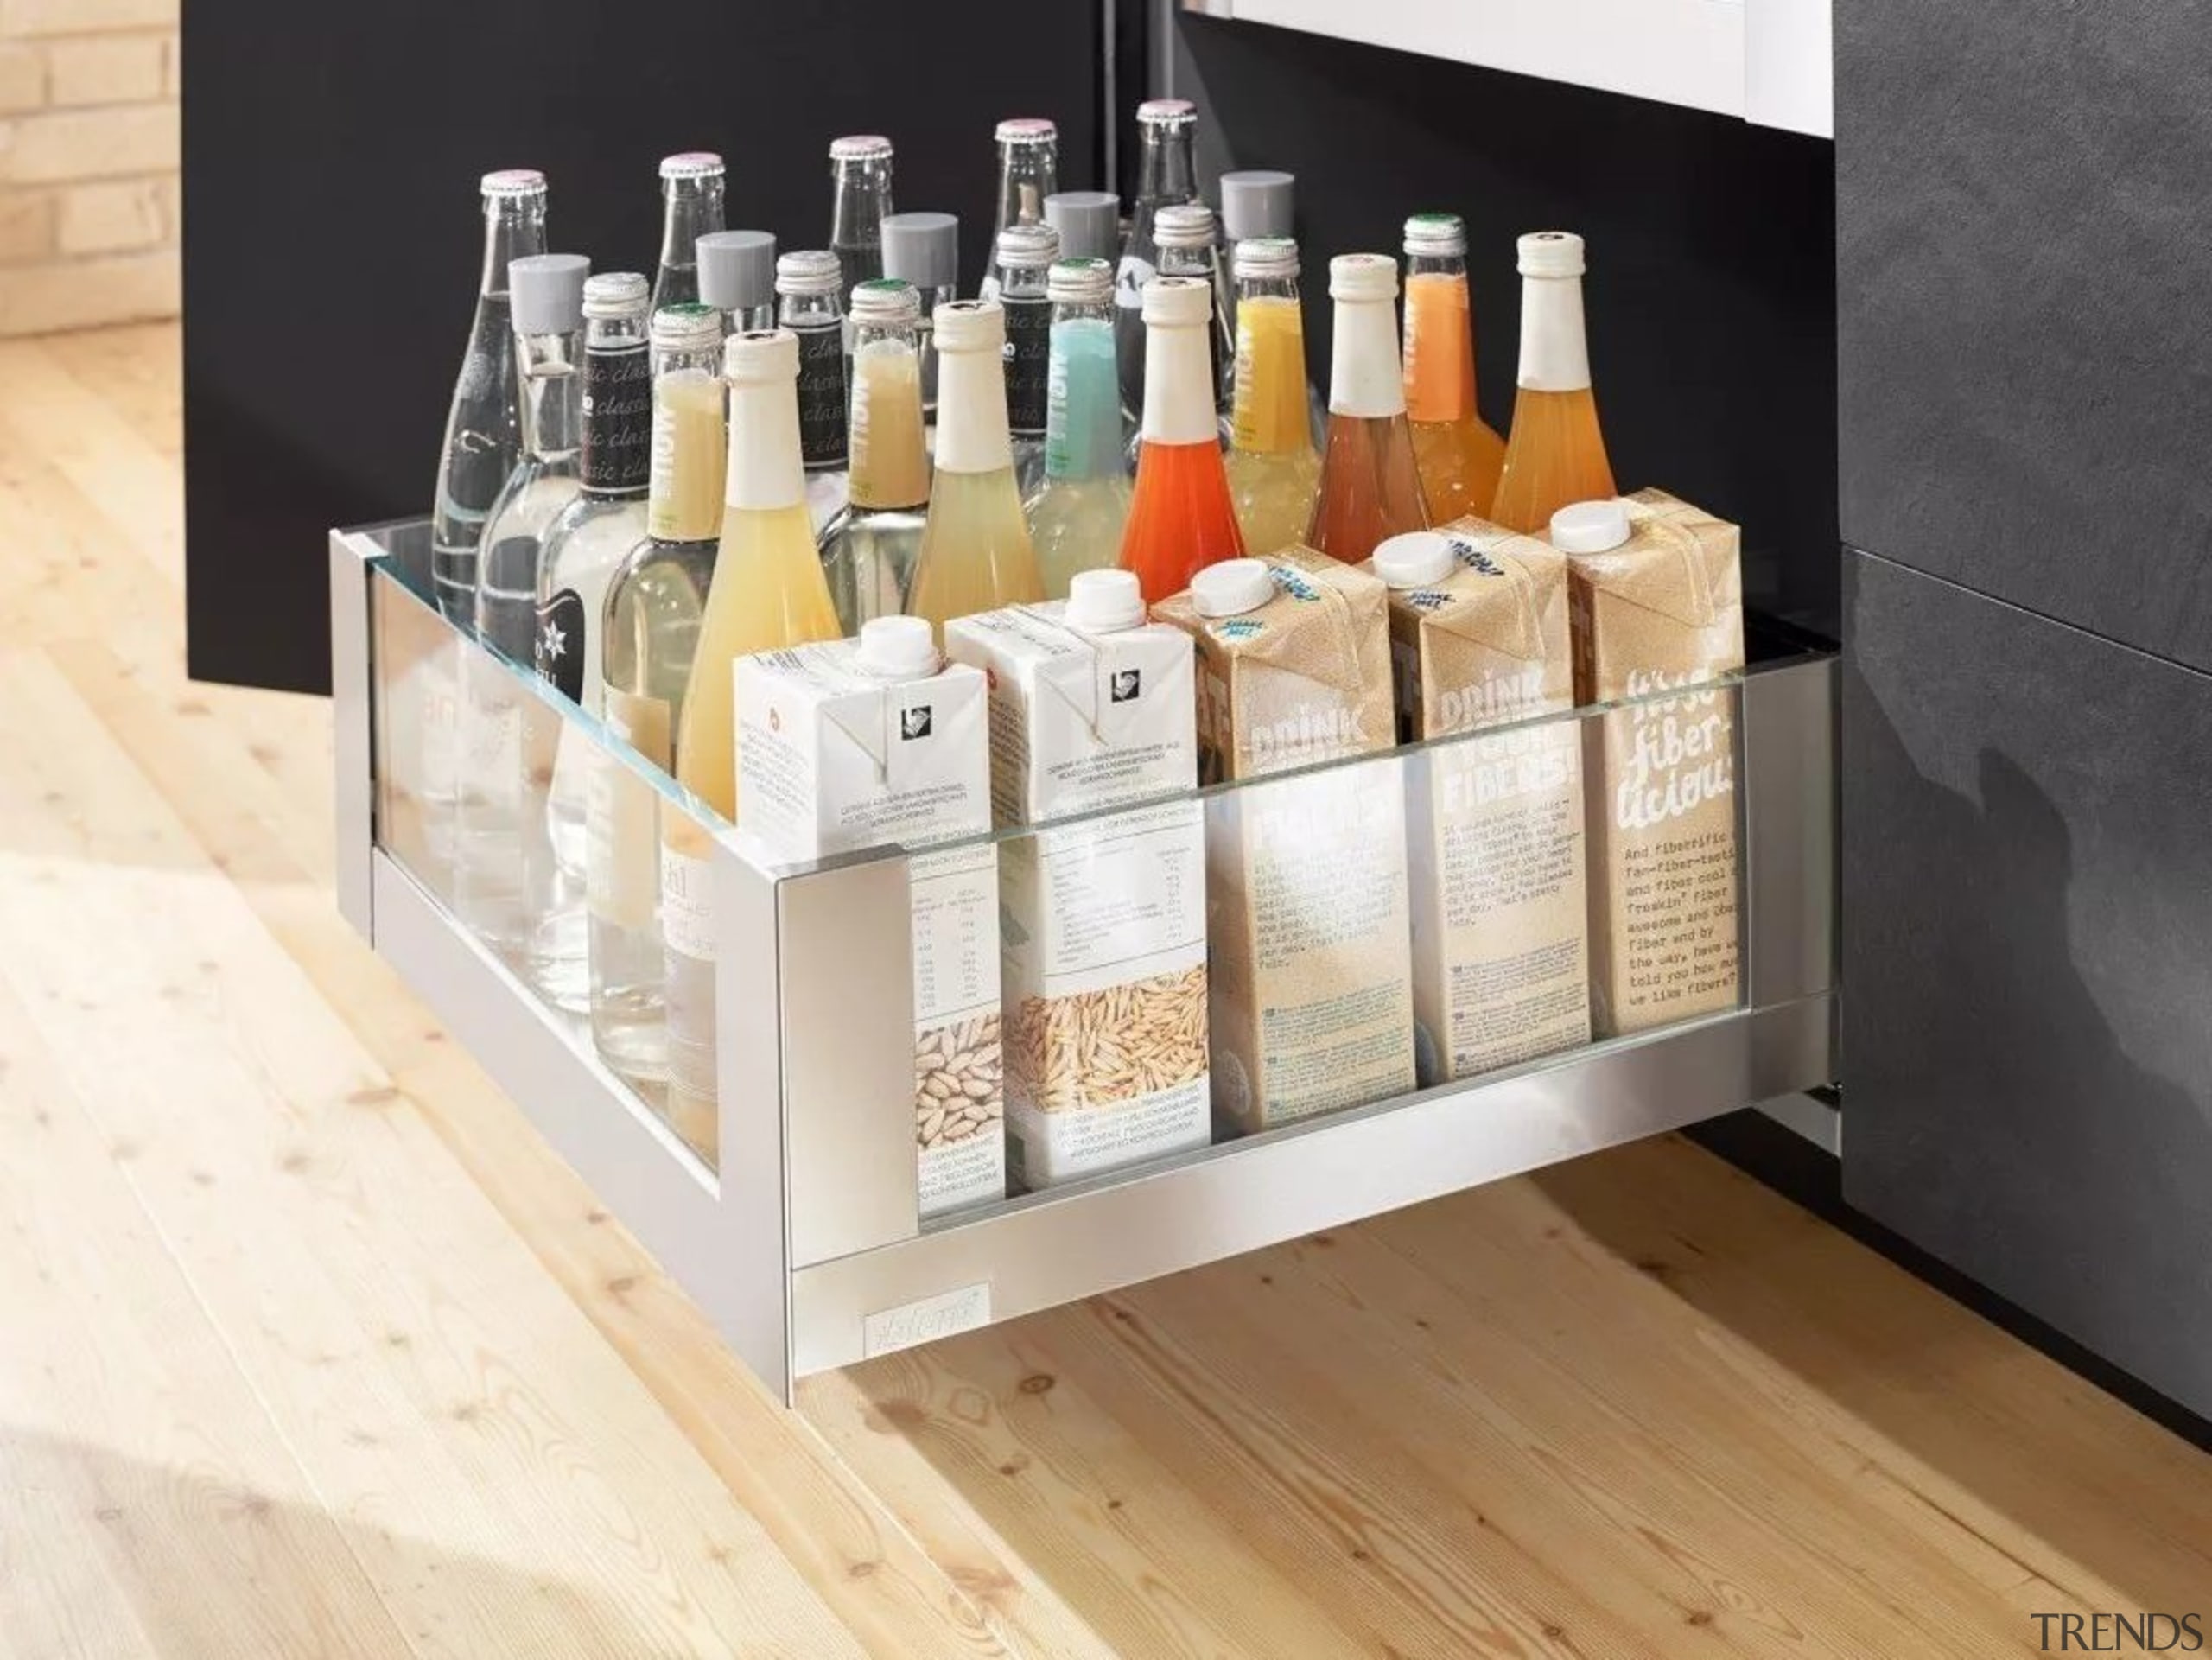 Learn more about Space Tower on the distilled beverage, furniture, liqueur, product, shelf, table, white